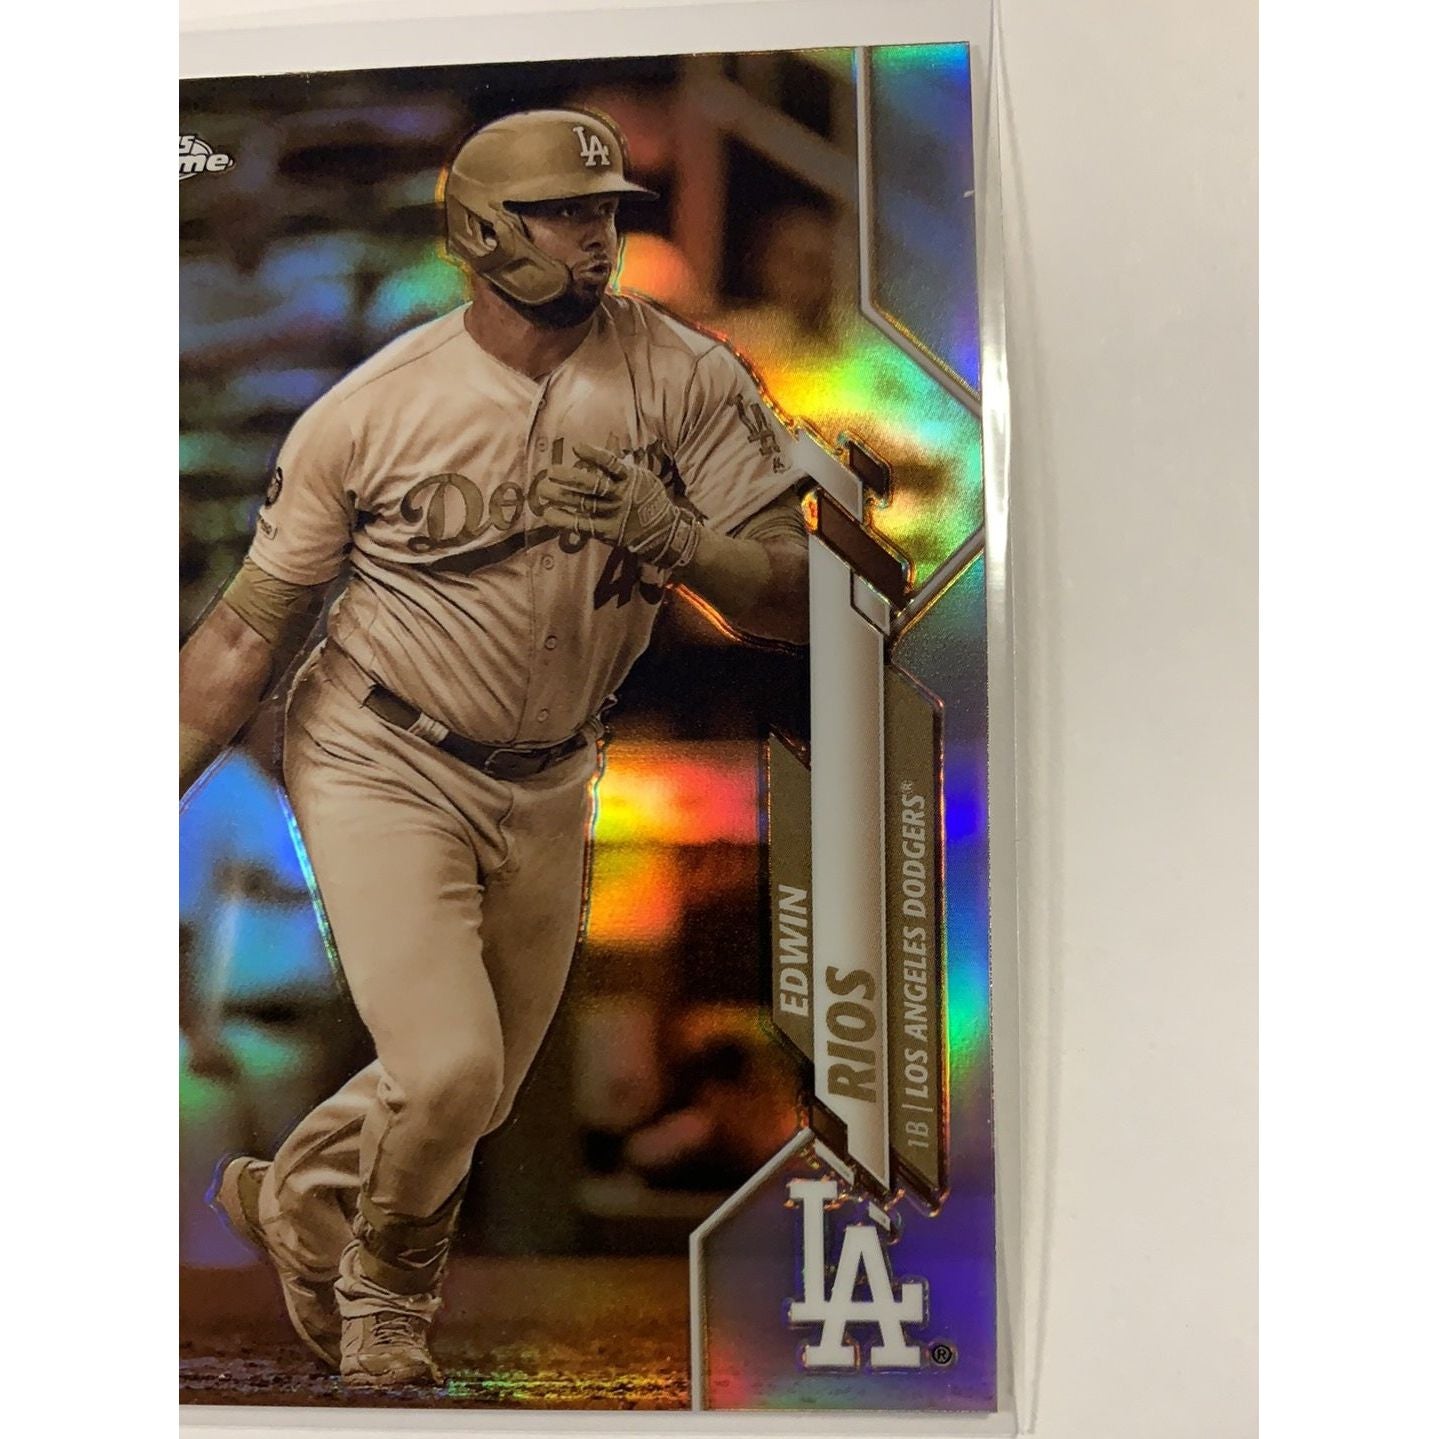  2020 Topps Chrome Edwin Rios RC Sepia Refractor  Local Legends Cards & Collectibles